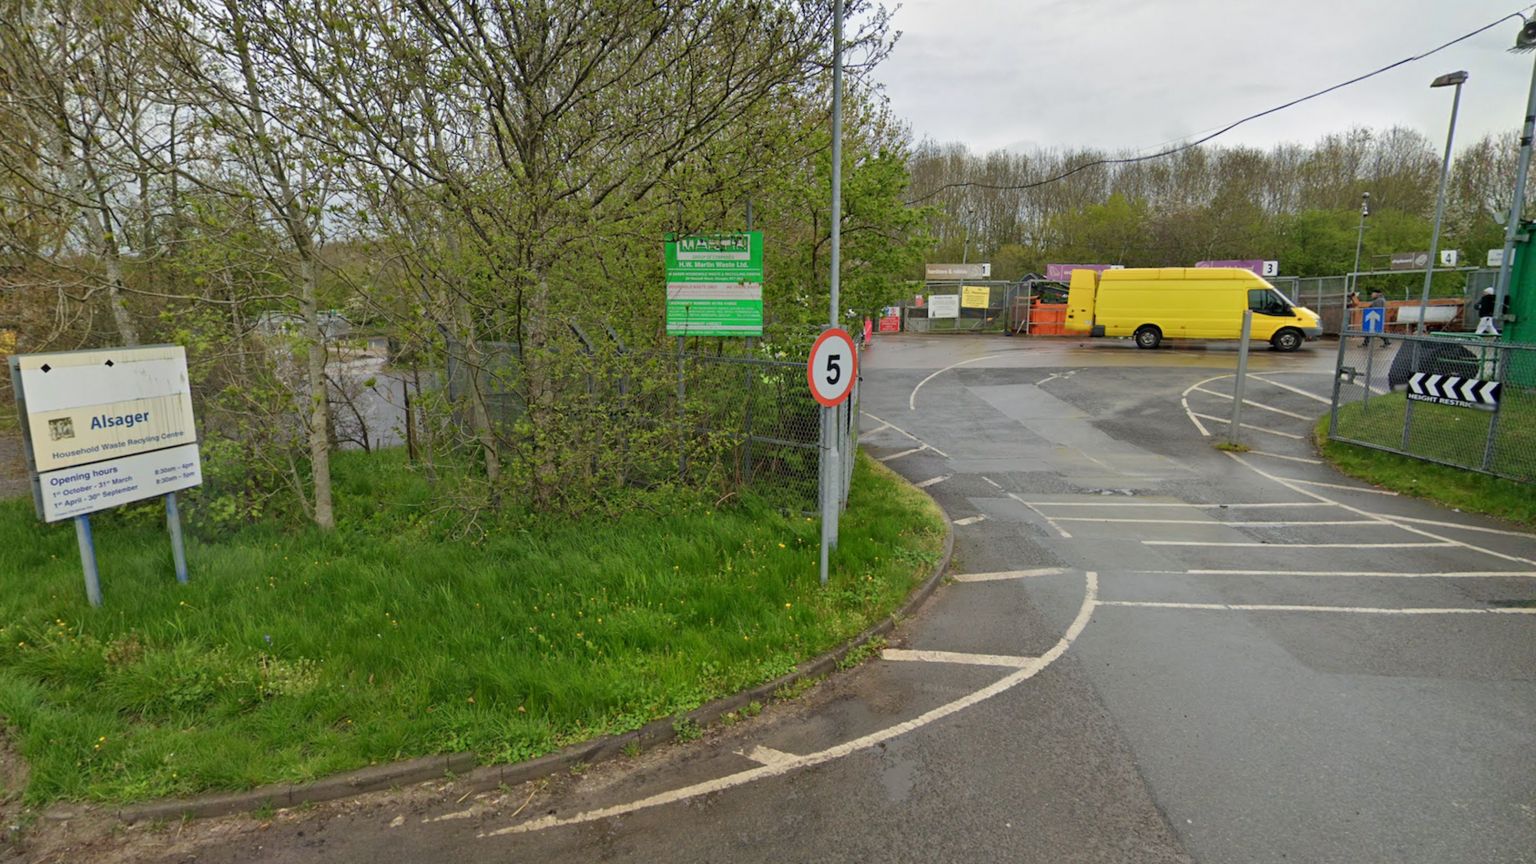 Alsager household waste recycling centre